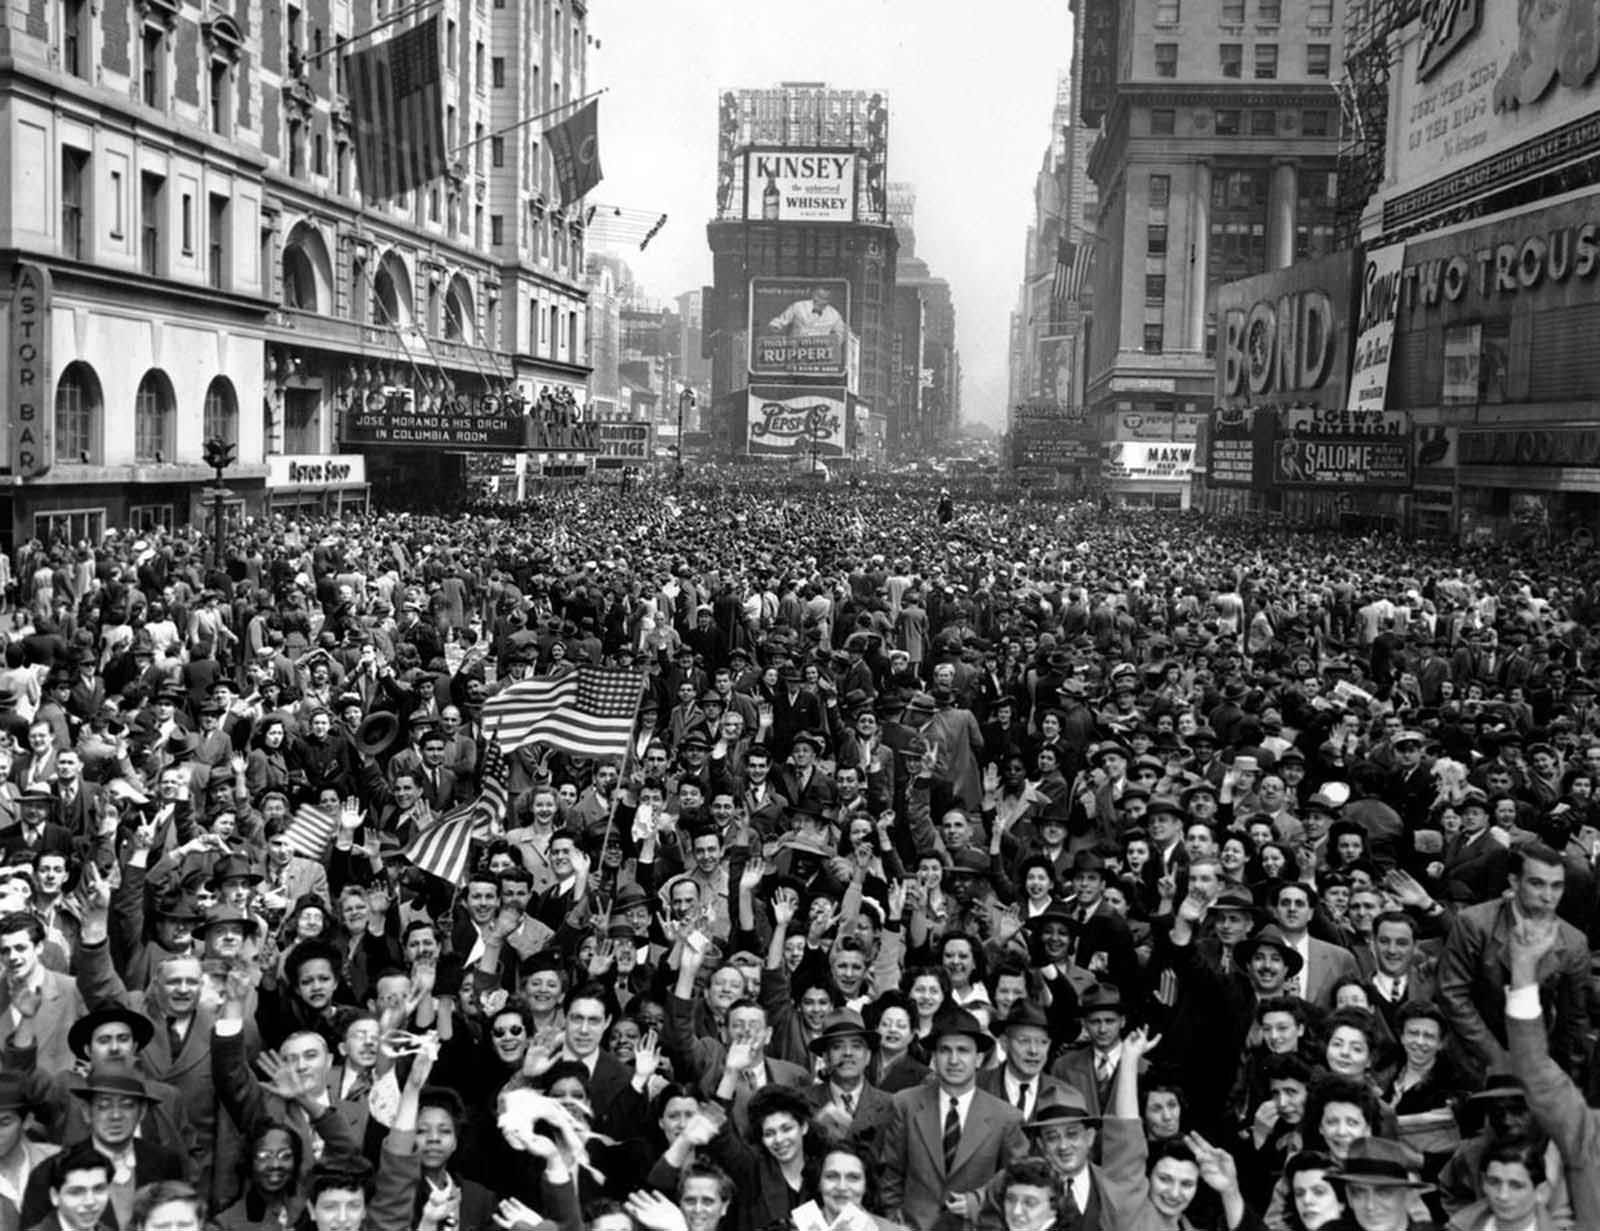 Looking north from 44th Street, New York’s Times Square is packed Monday, May 7, 1945, with crowds celebrating the news of Germany’s unconditional surrender in World War II.